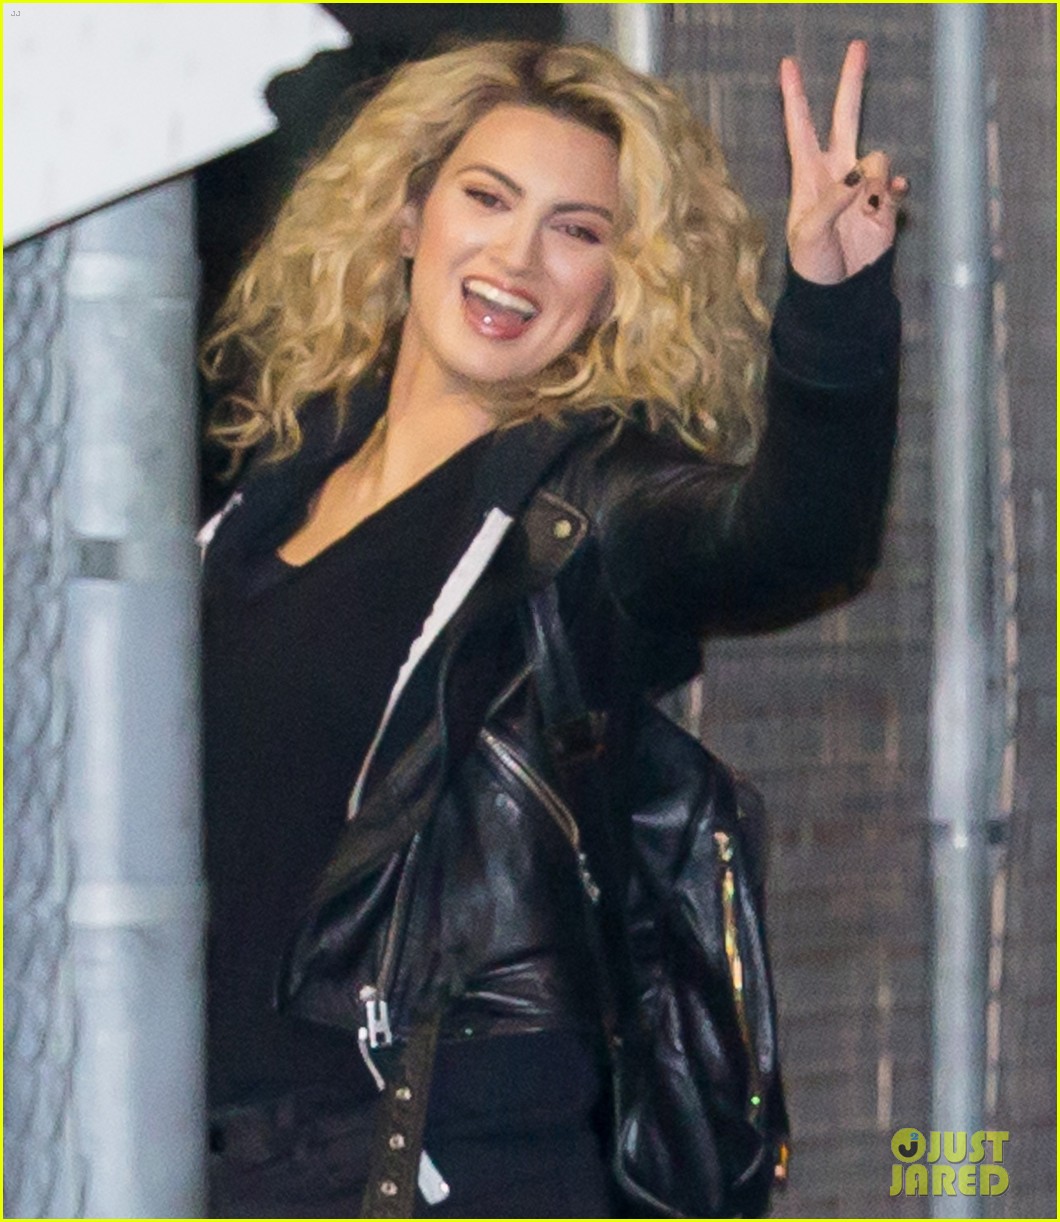 tori kelly performs funny for first time on jimmy kimmel live 04